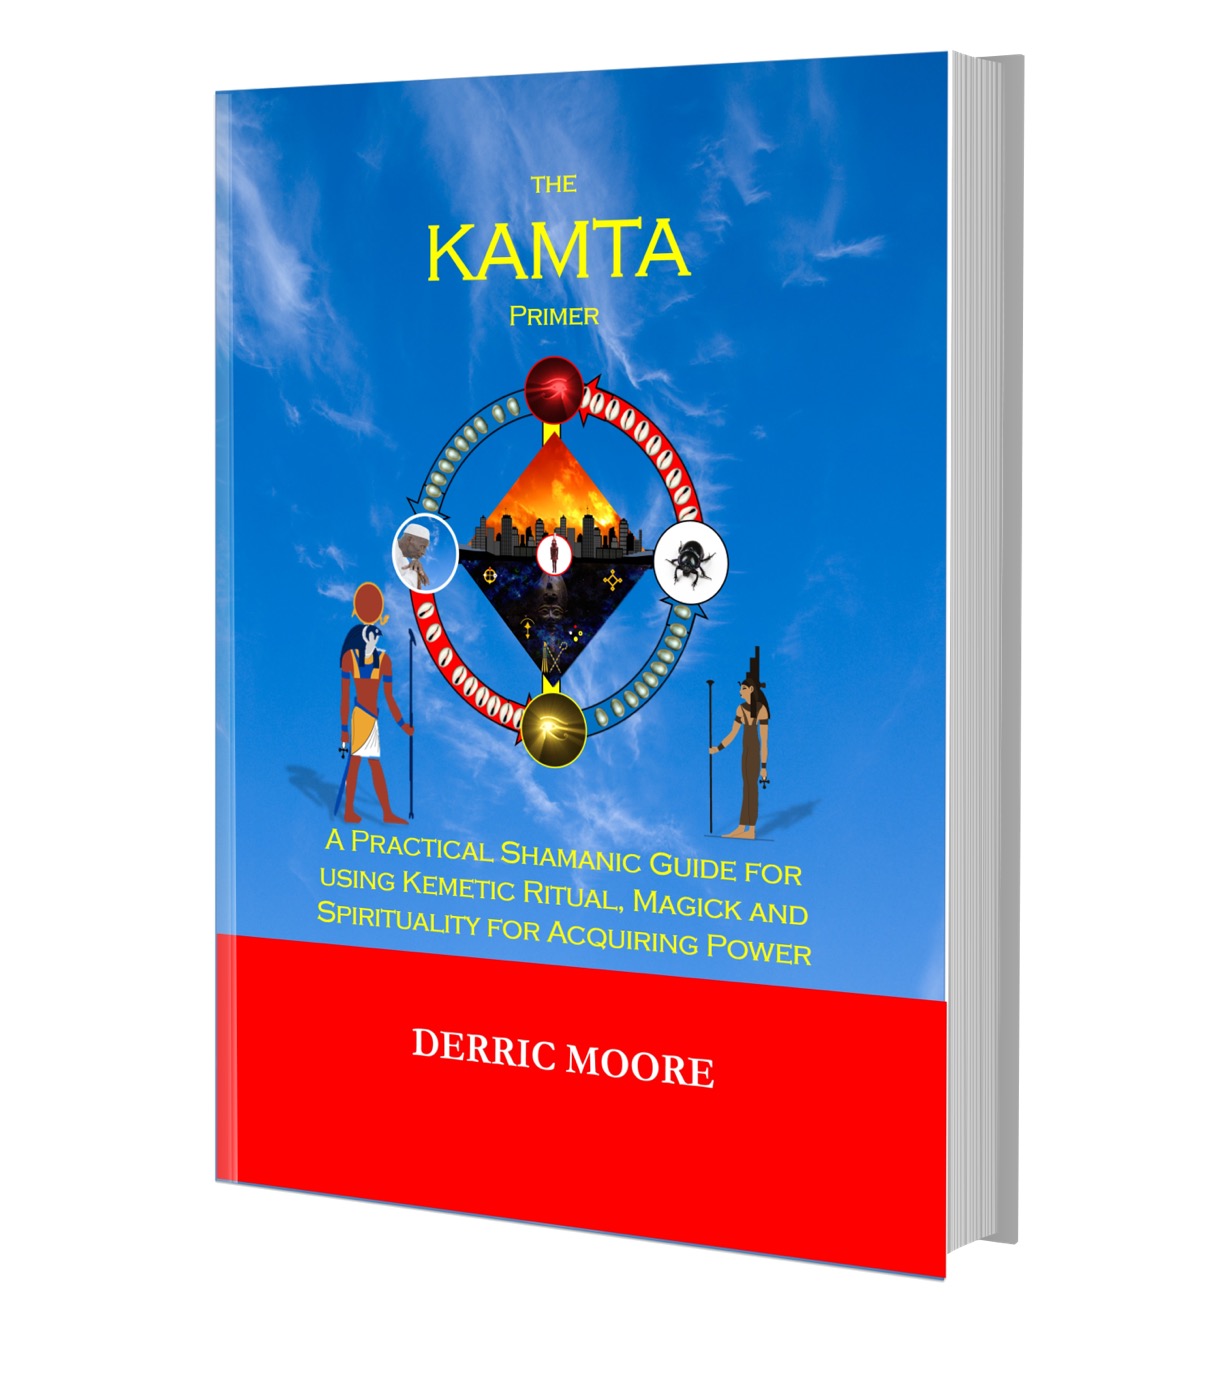 The KAMTA Primer: A Practical Shamanic Guide for using Kemetic Ritual, Magick and Spirituality for Acquiring Power